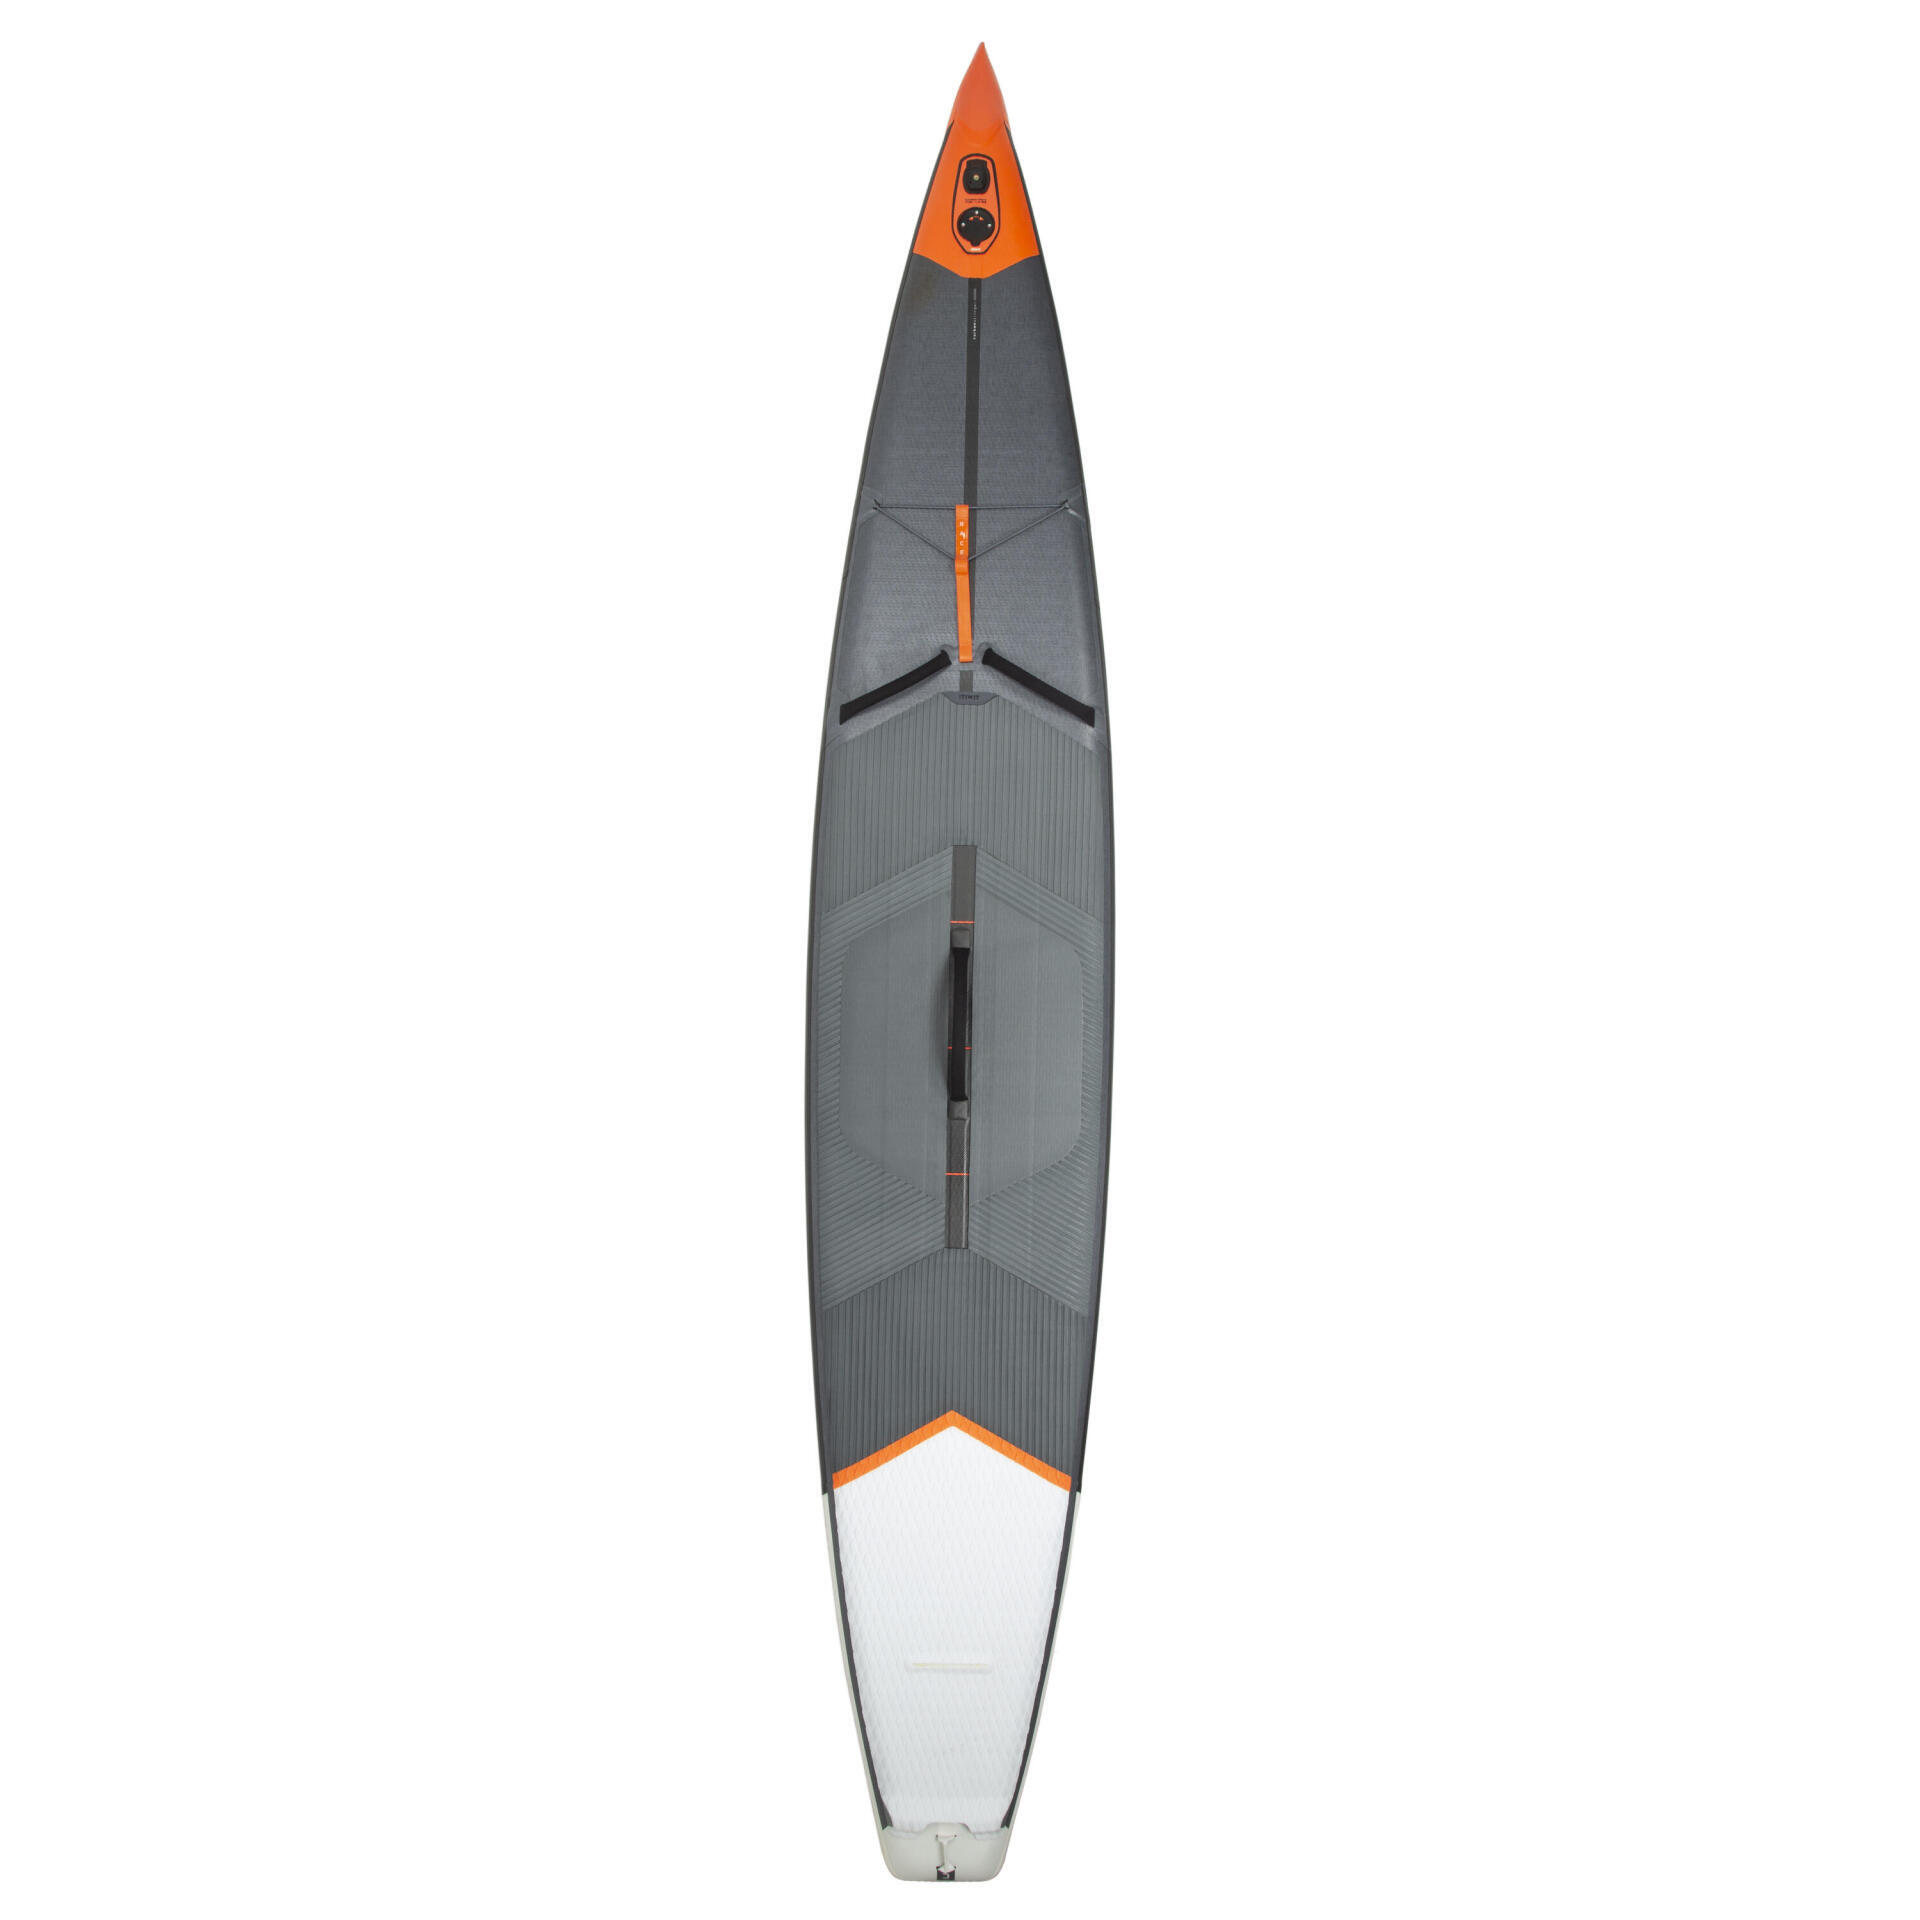 RACING STAND-UP PADDLE BOARD